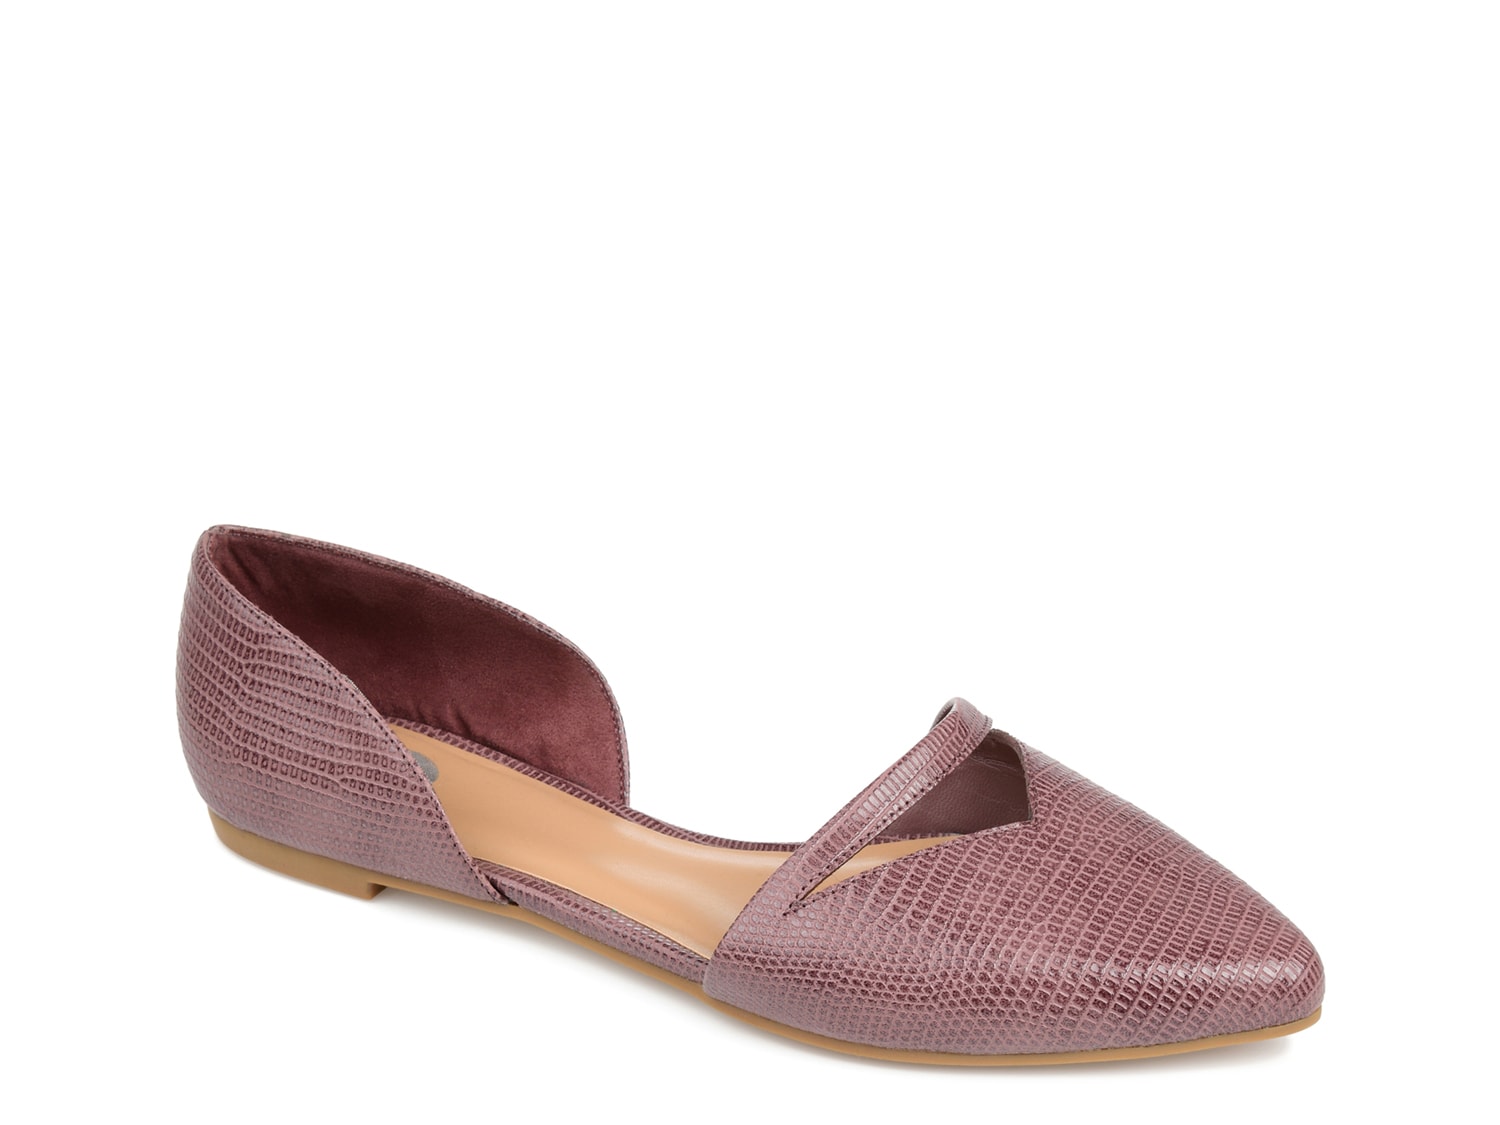 Journee Collection Braely Flat - Free Shipping | DSW